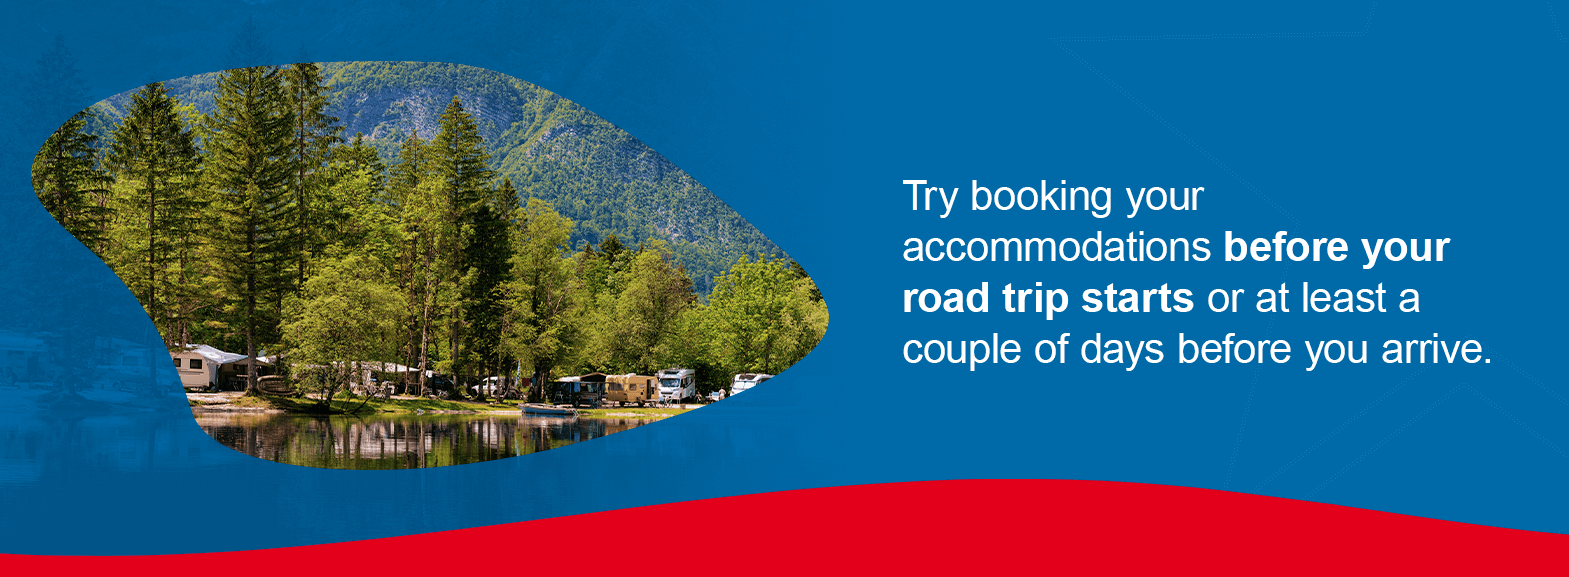 Try booking your accommodations before your road trip starts or at least a couple of days before you arrive.